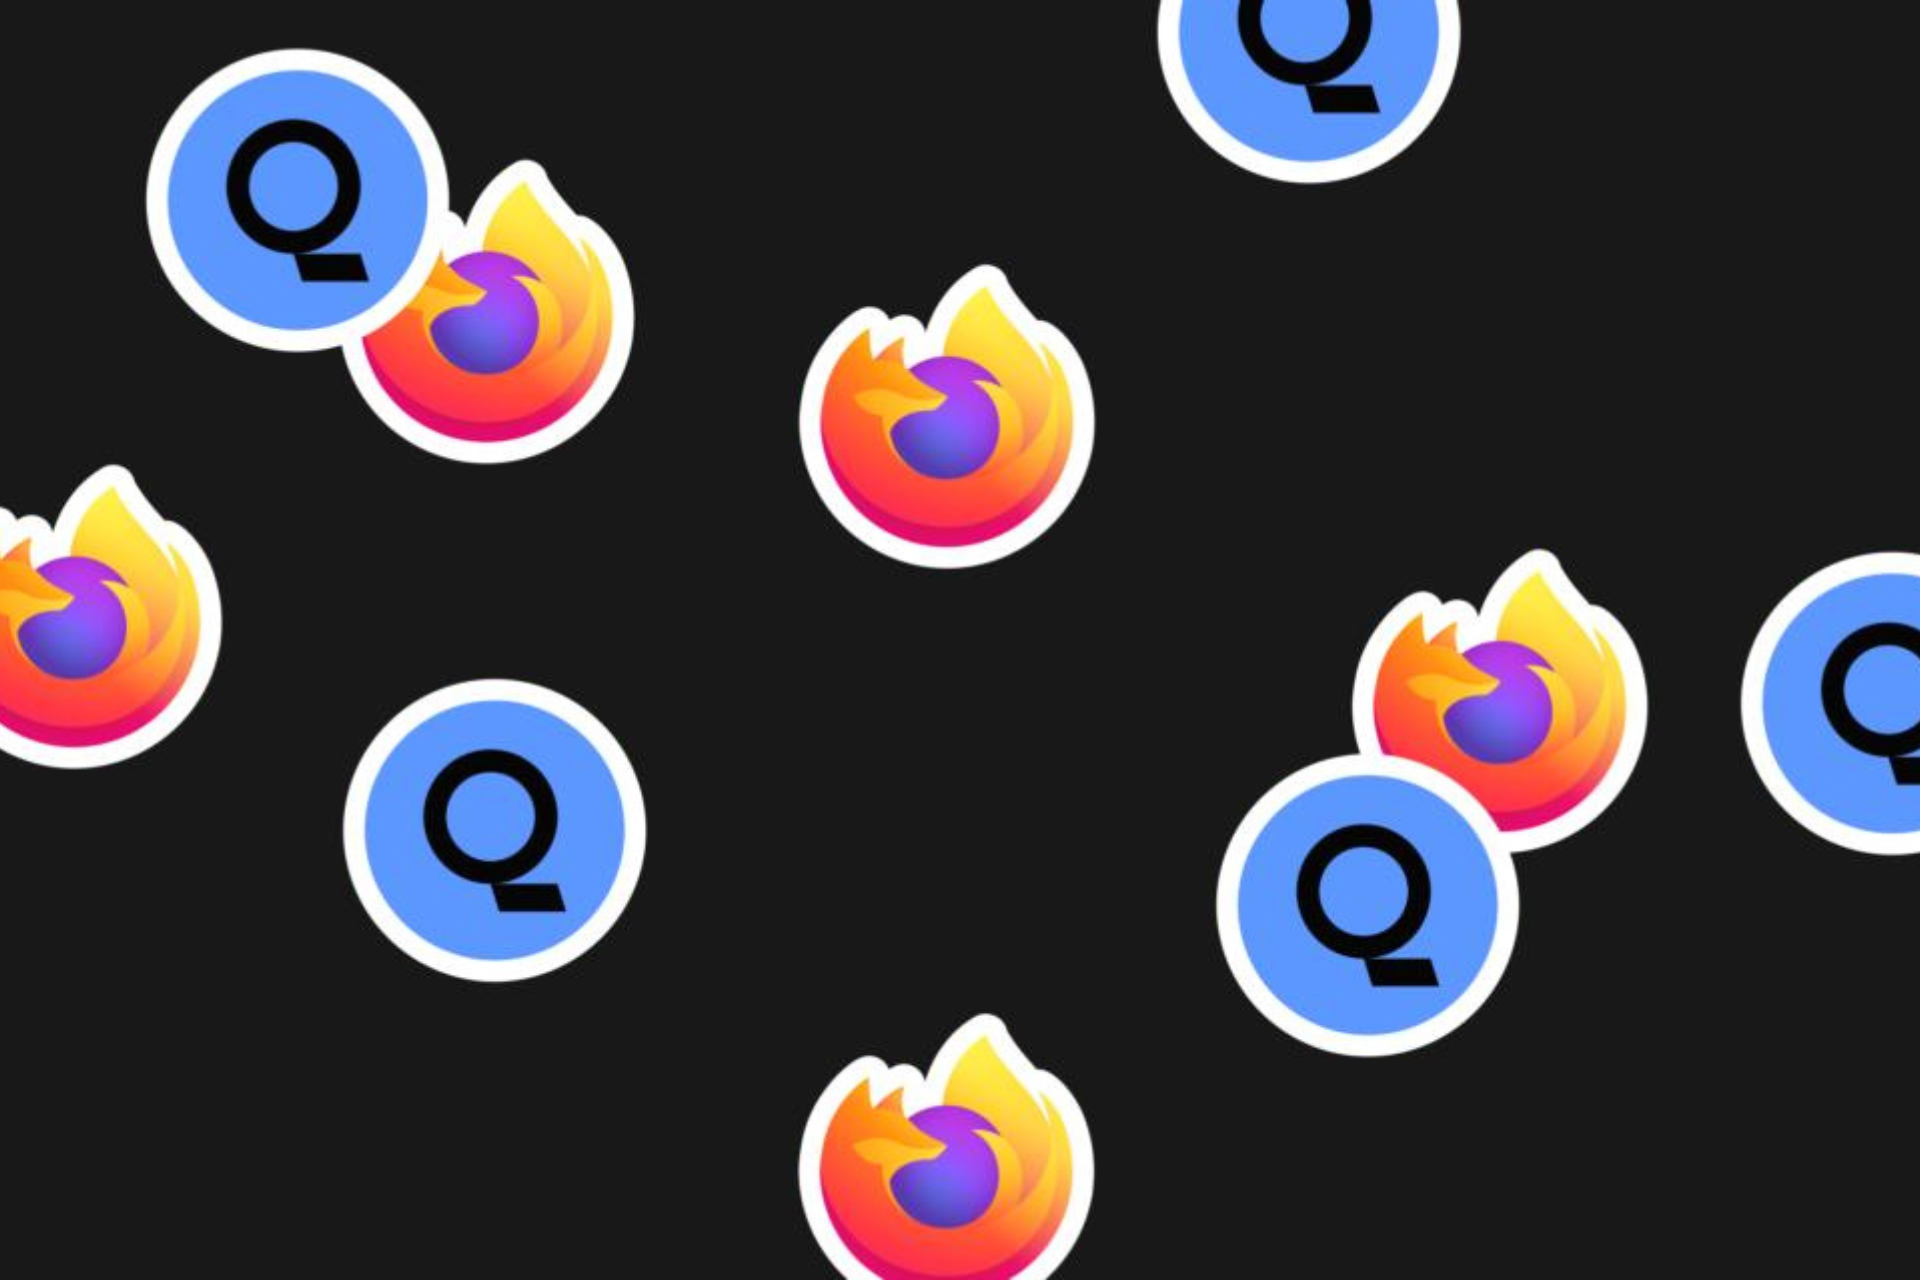 Firefox partners up with Qwant: Can we expect more privacy while browsing?